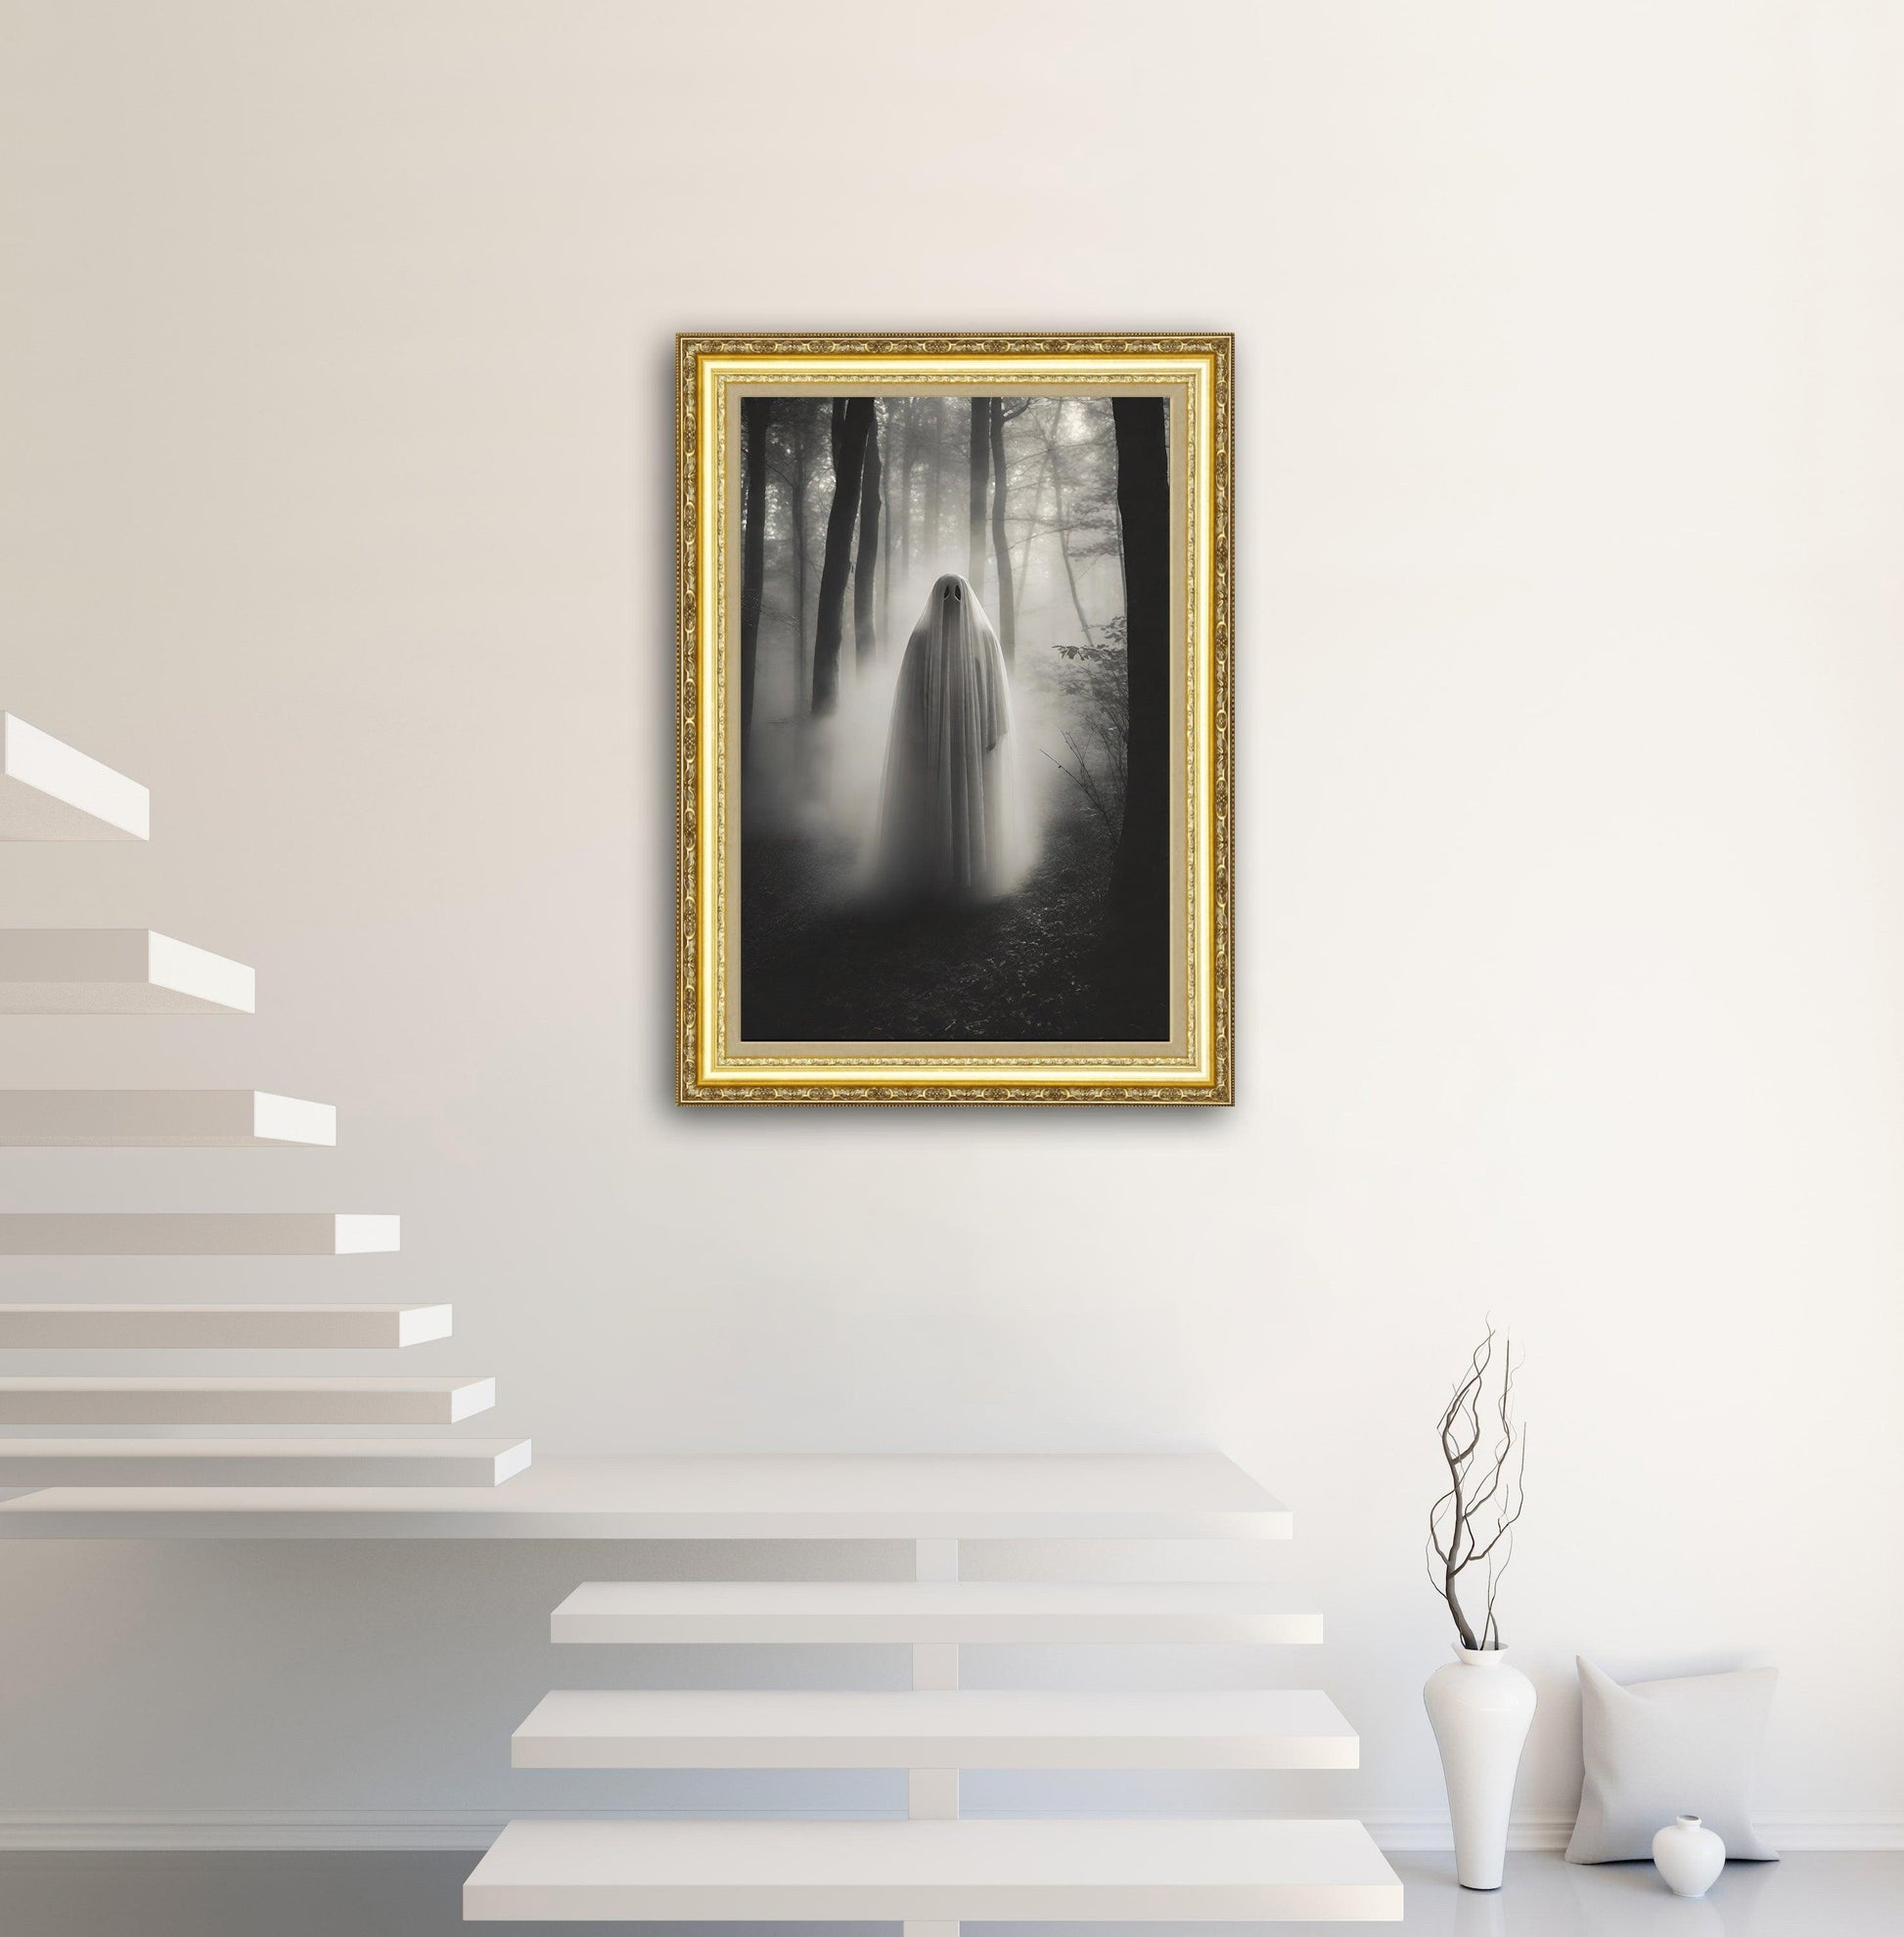 Embark on a journey through the unknown with our Dark Art pieces, where the mystical and the macabre intertwine to create a captivating narrative on canvas.